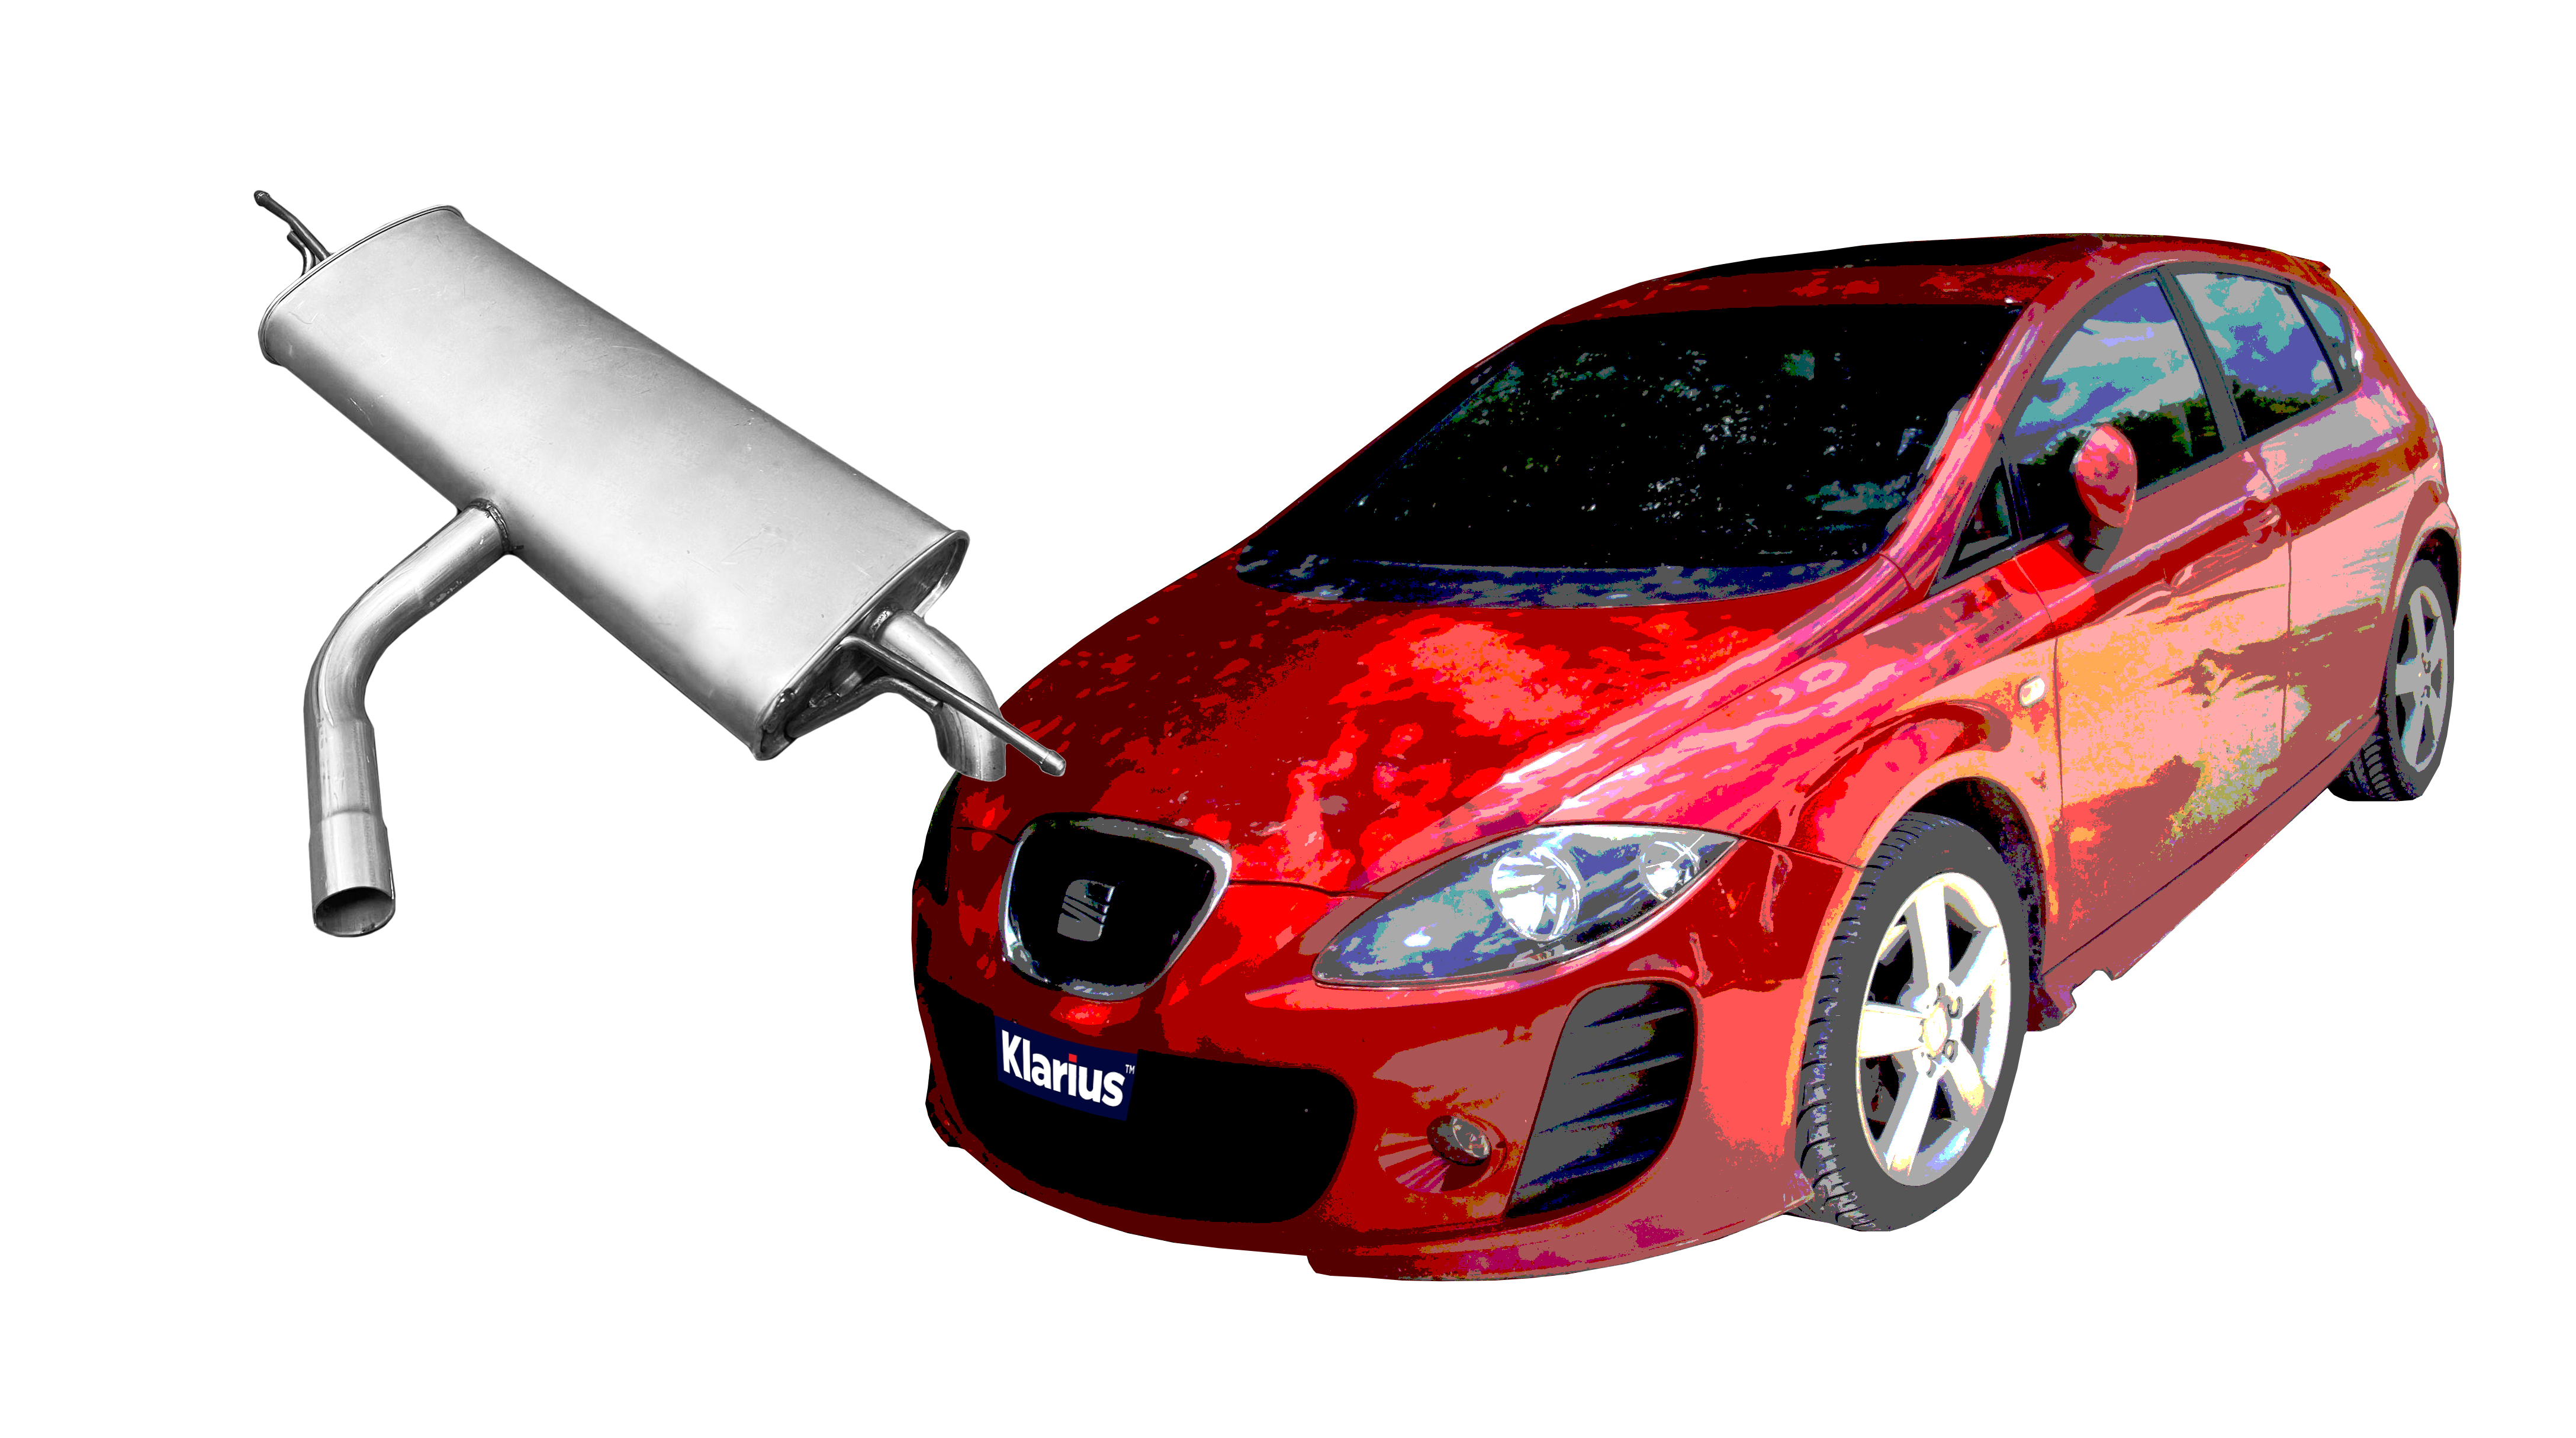 Klarius releases new range of aftermarket car parts, including support for Seat Leon models.